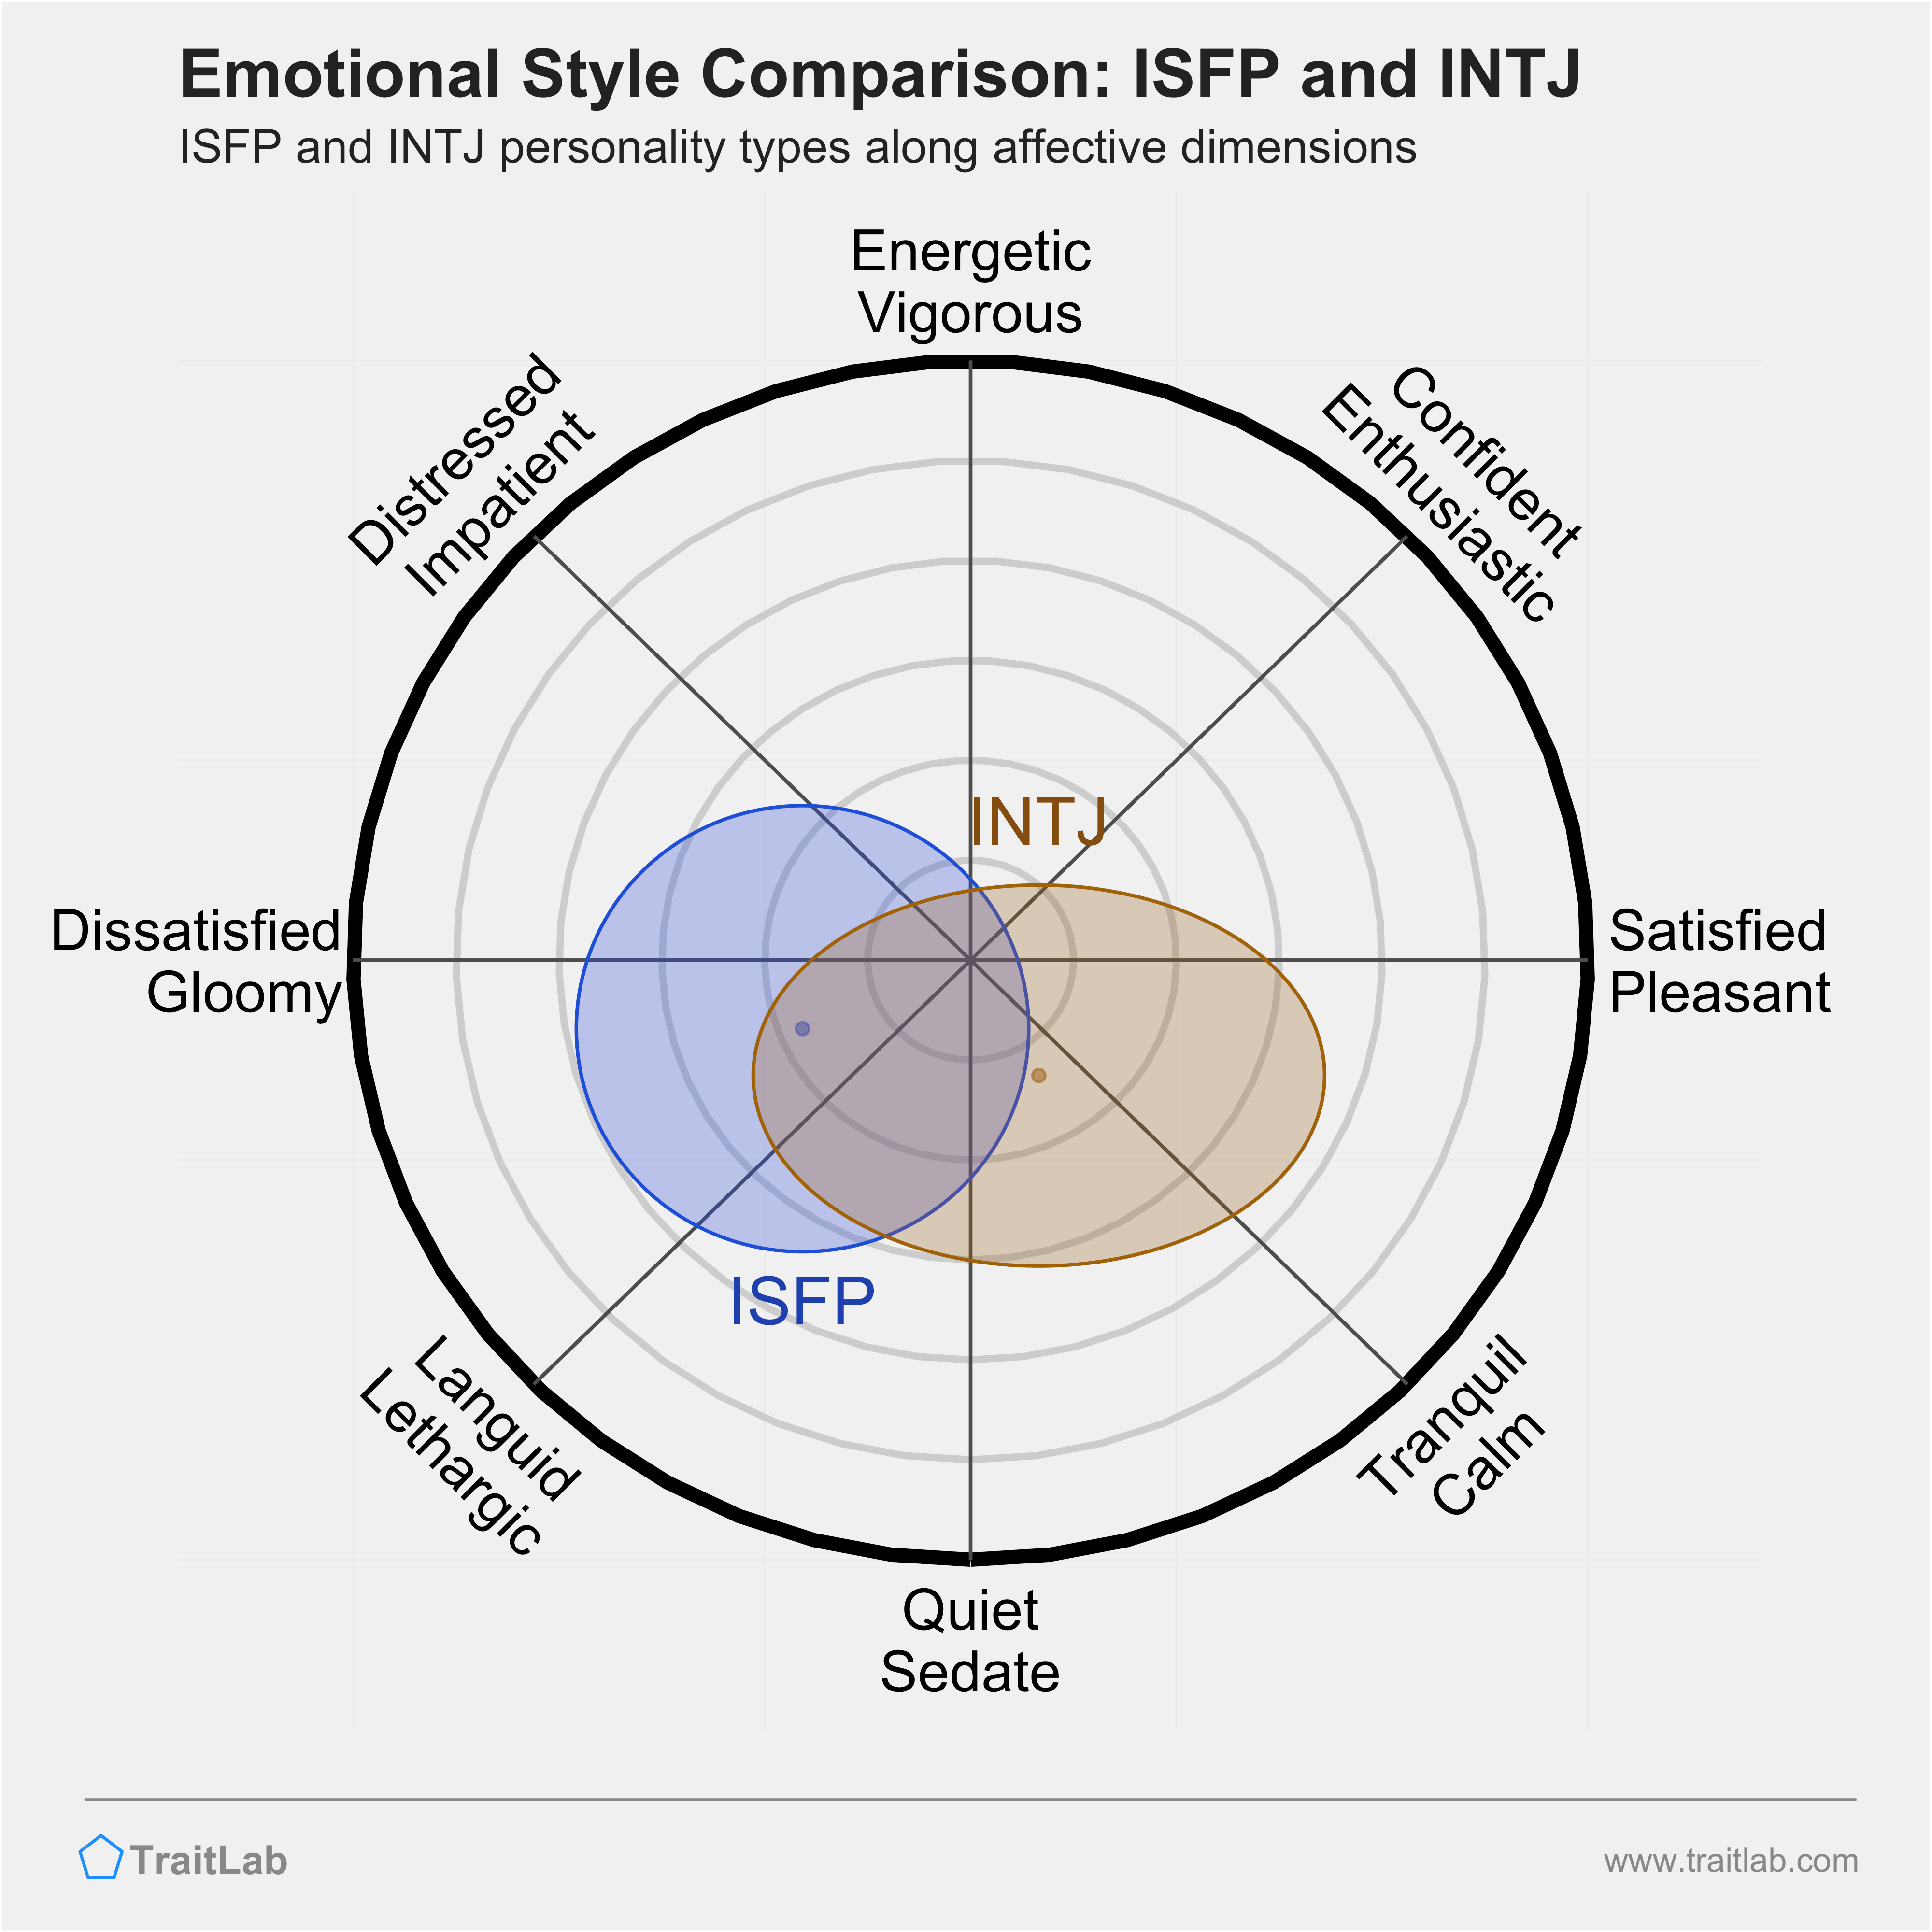 ISFP and INTJ comparison across emotional (affective) dimensions